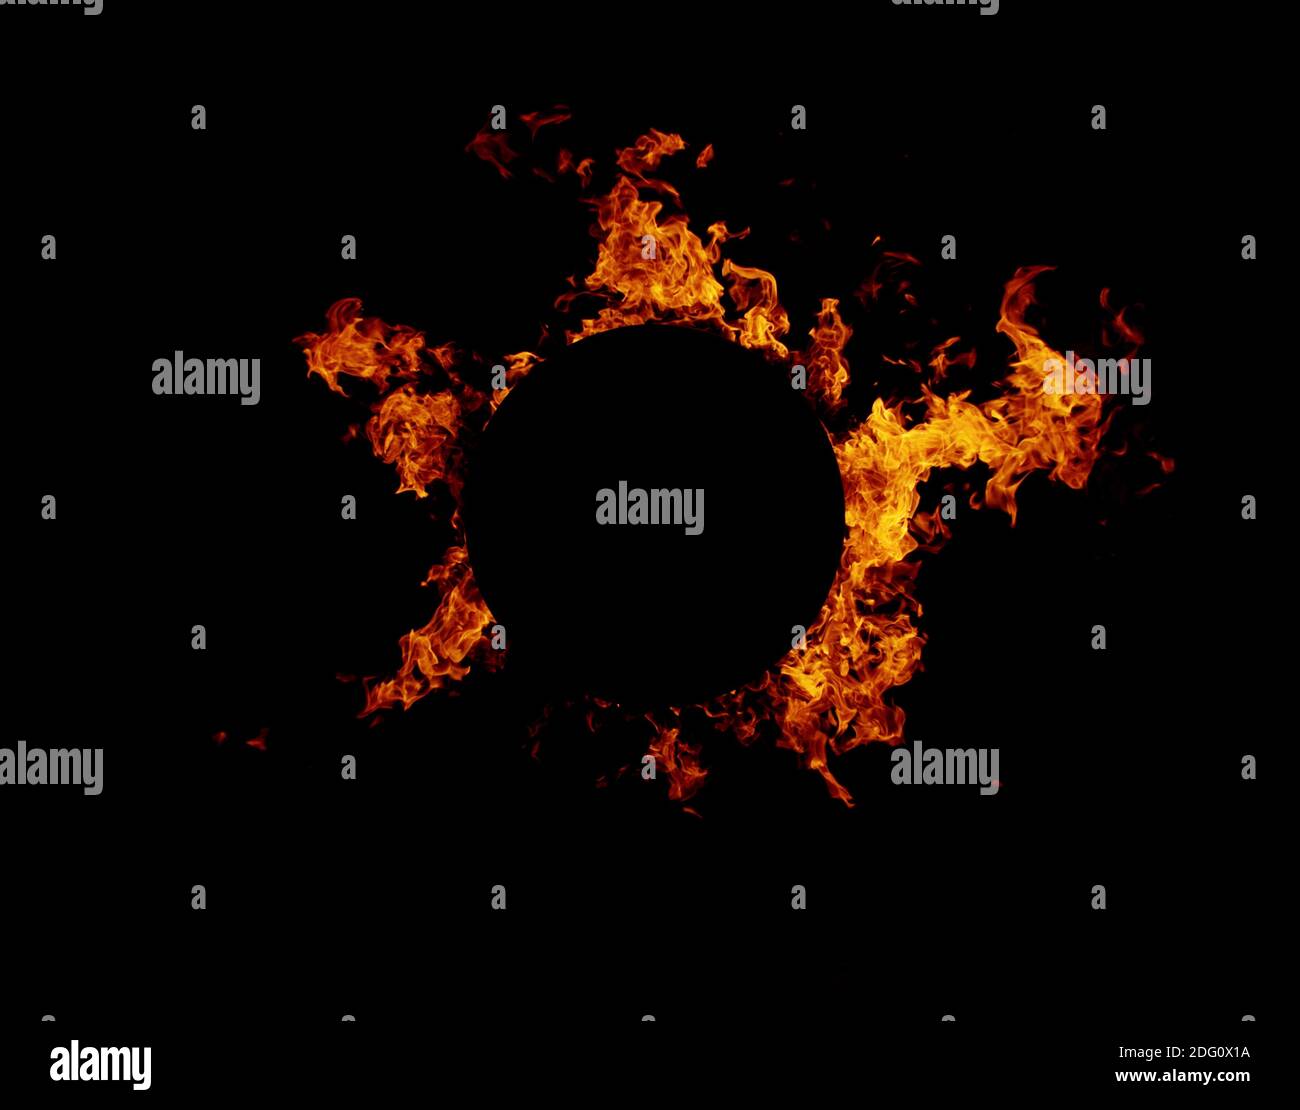 Fire ring isolated on black background, abstract circle shape with free space for text. Stock Photo